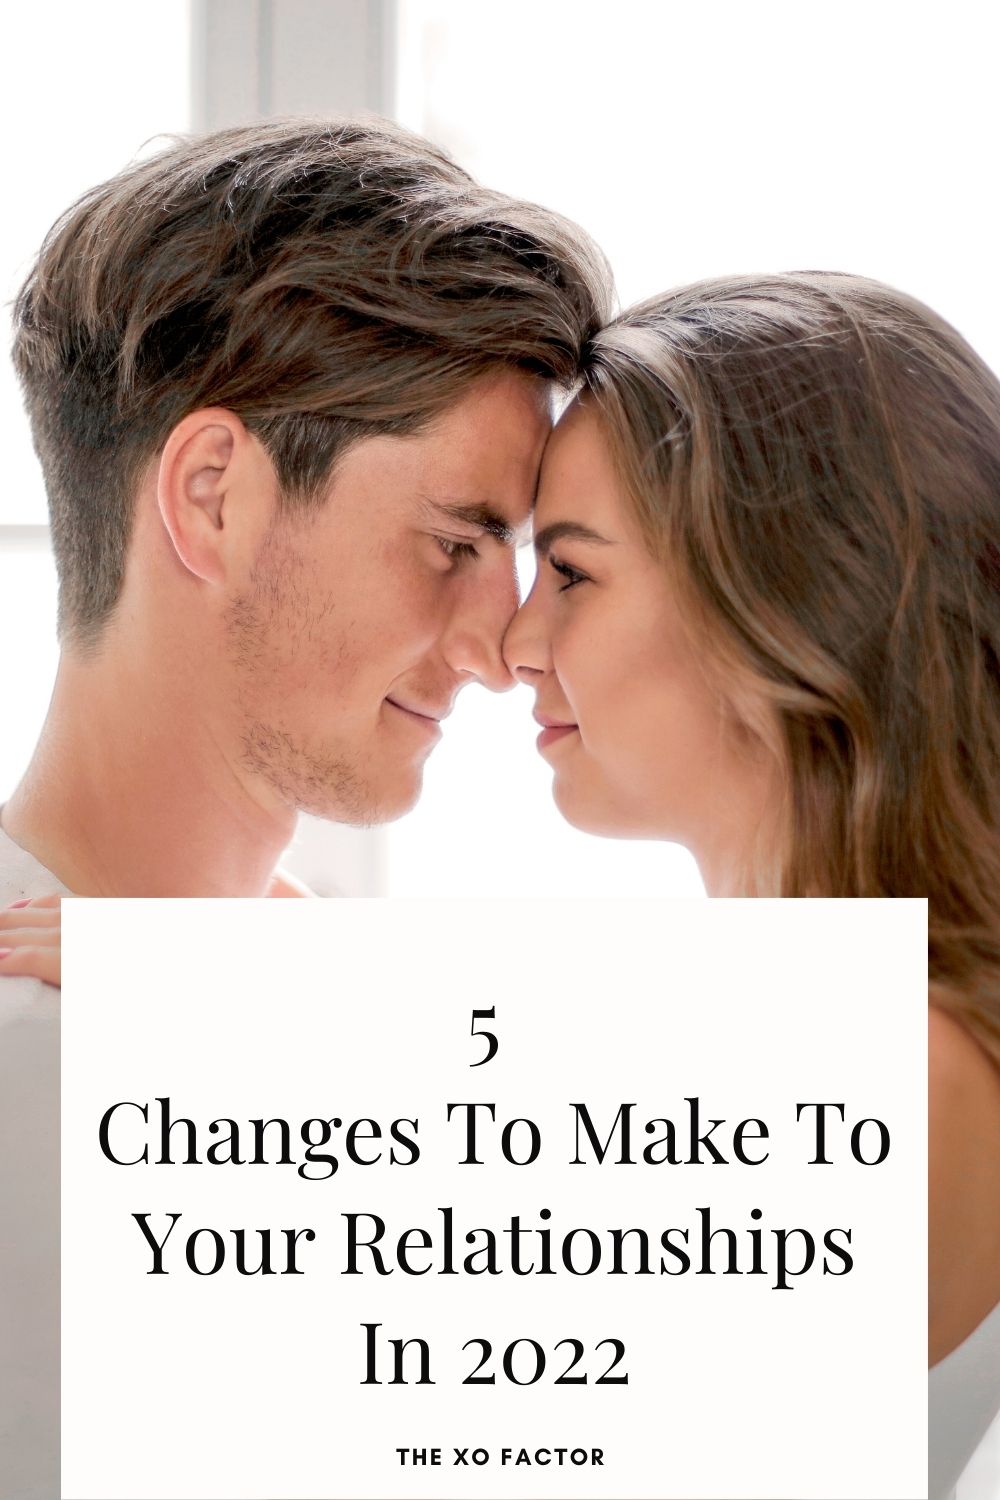 5 Changes To Make To Your Relationships In 2022